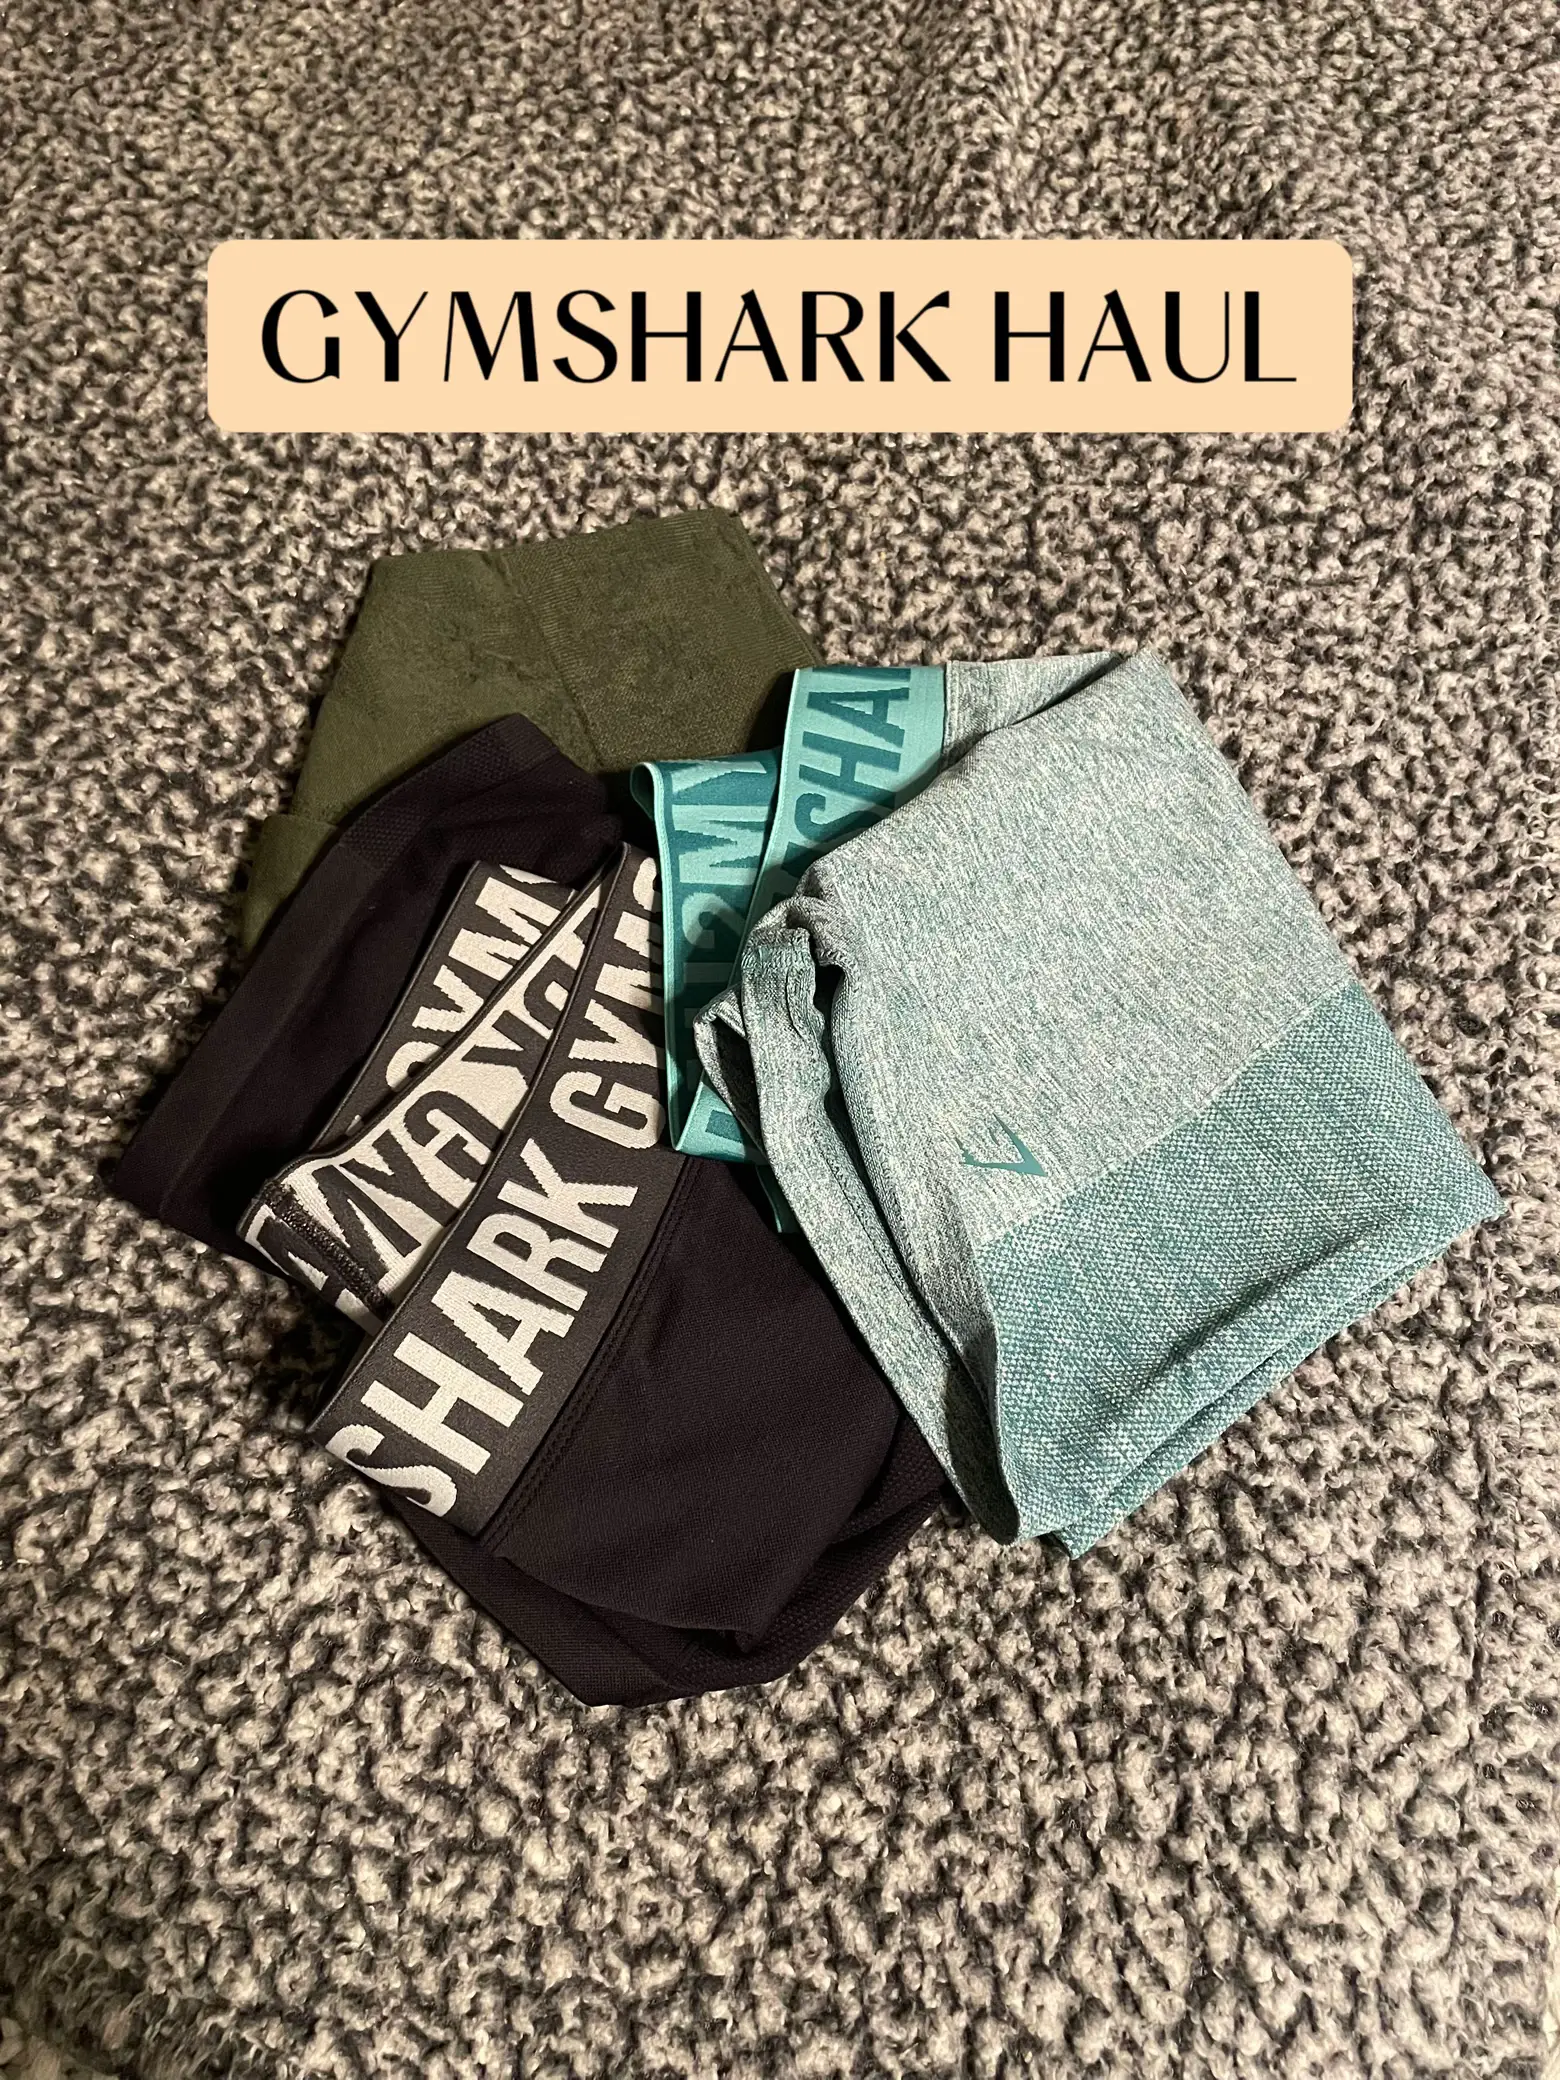 gym clothes try on haul🫶🏼 #haul #gymclothes